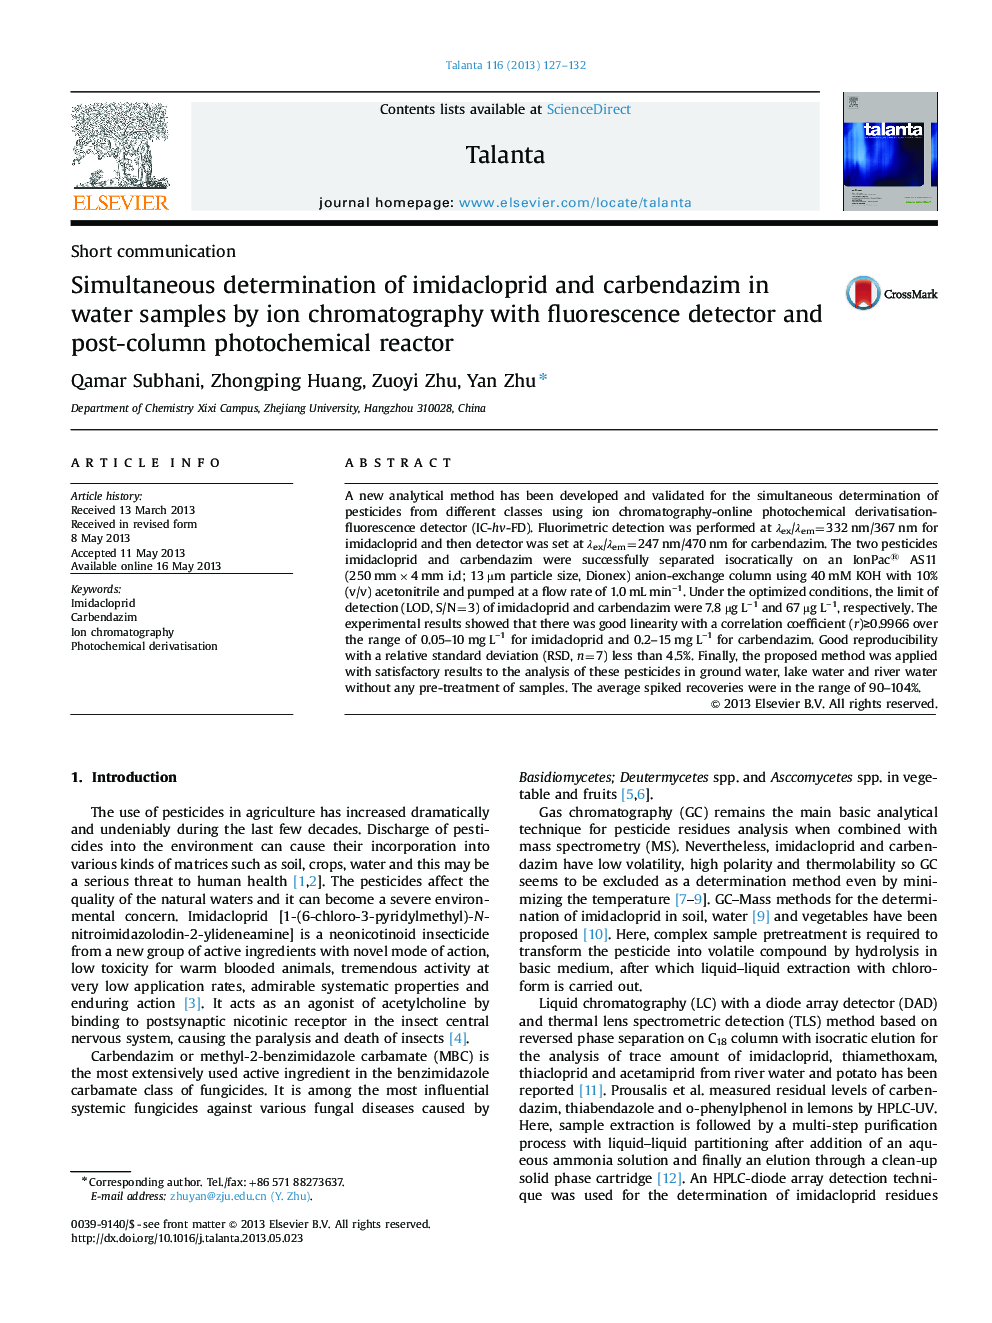 Simultaneous determination of imidacloprid and carbendazim in water samples by ion chromatography with fluorescence detector and post-column photochemical reactor